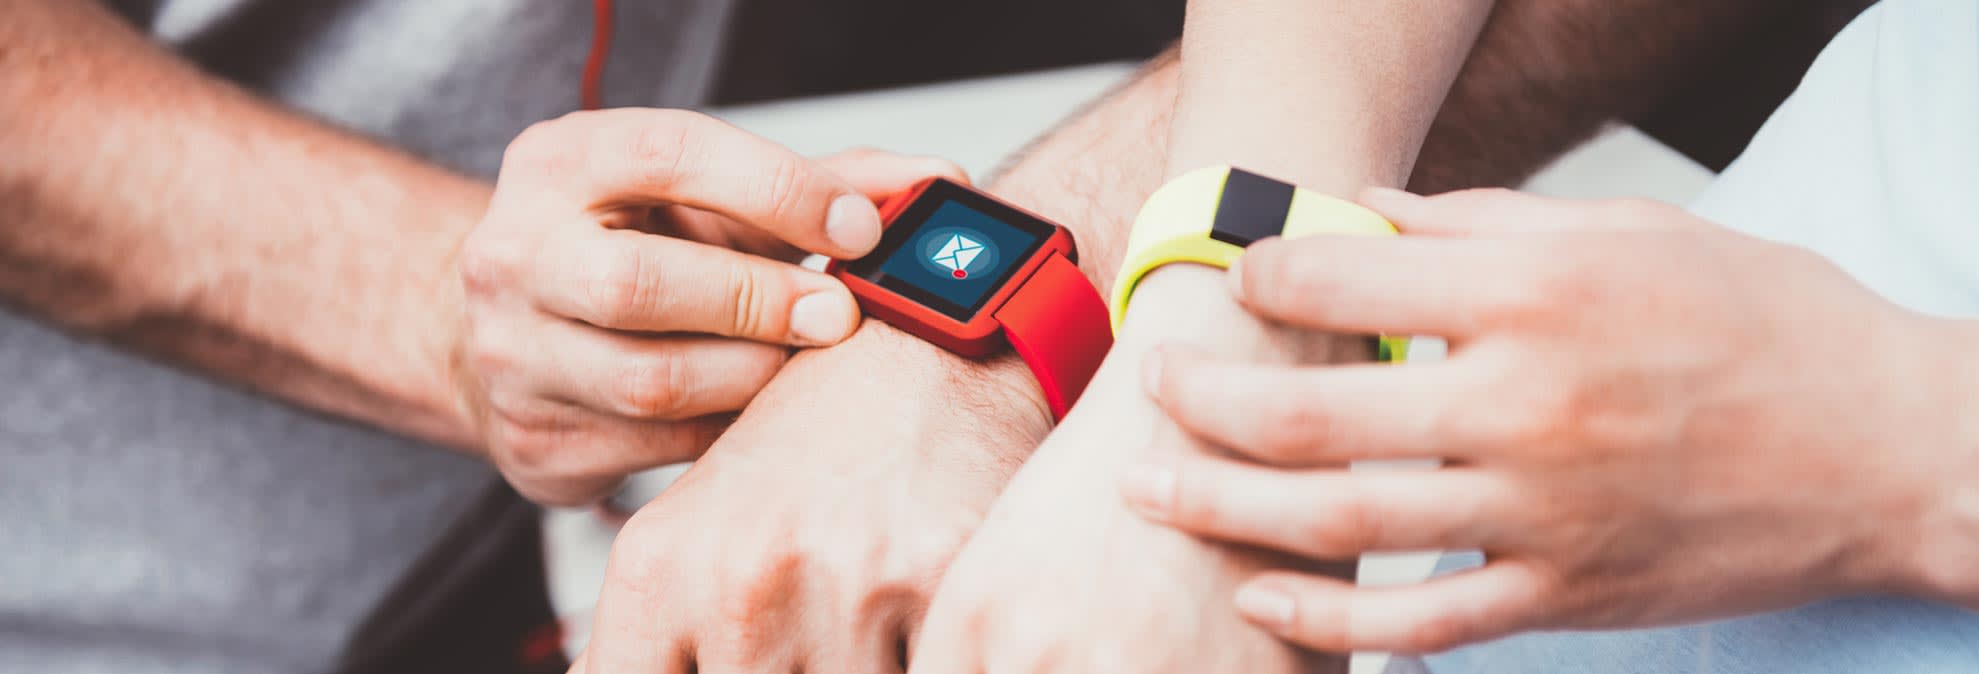 Fitness Tracker or Smartwatch Consumer Reports